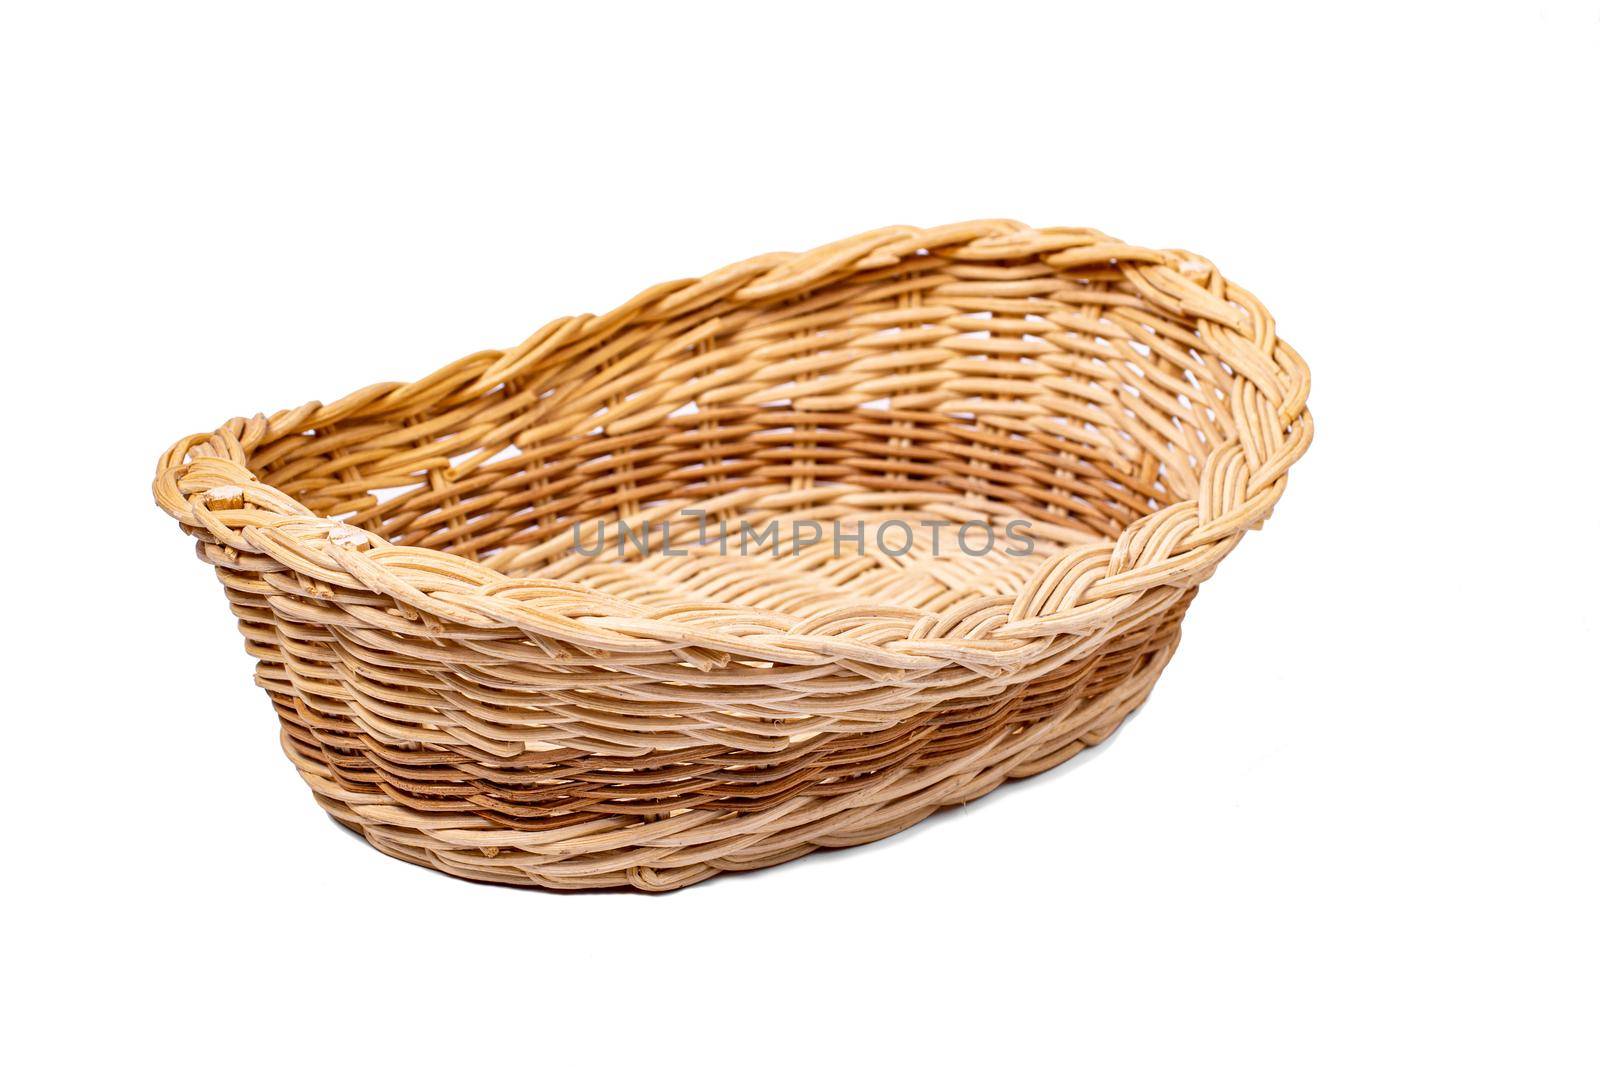 handmade wicker basket made of wooden rods, insulated on a white background